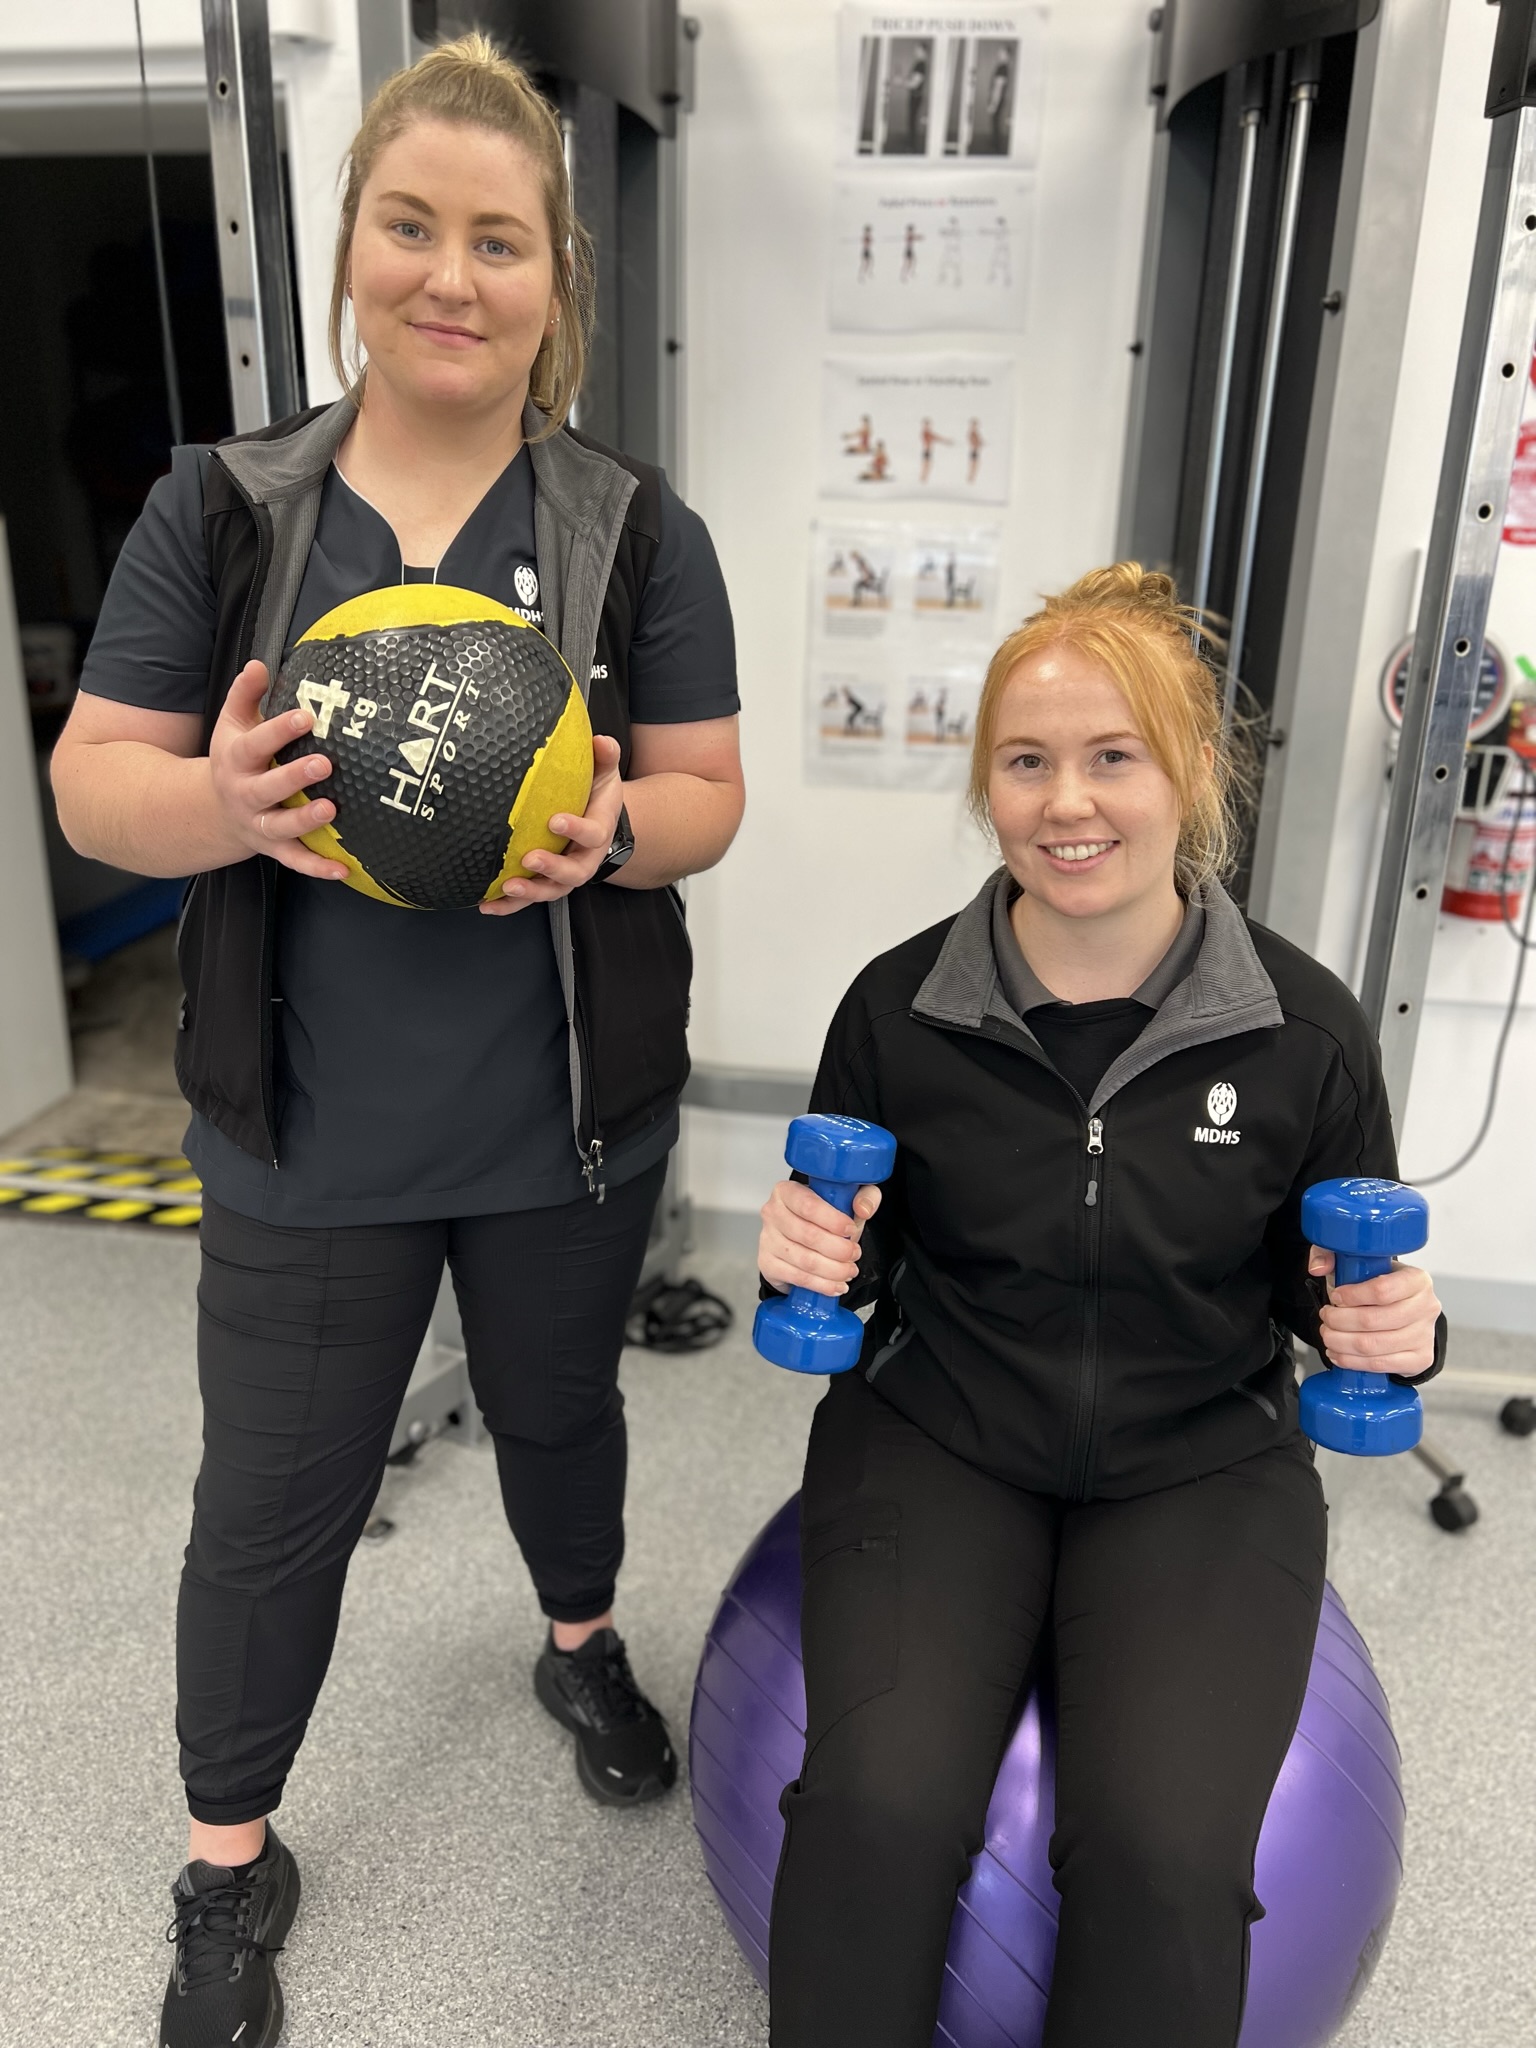 MDHS Exercise physiologists Demi and Sian